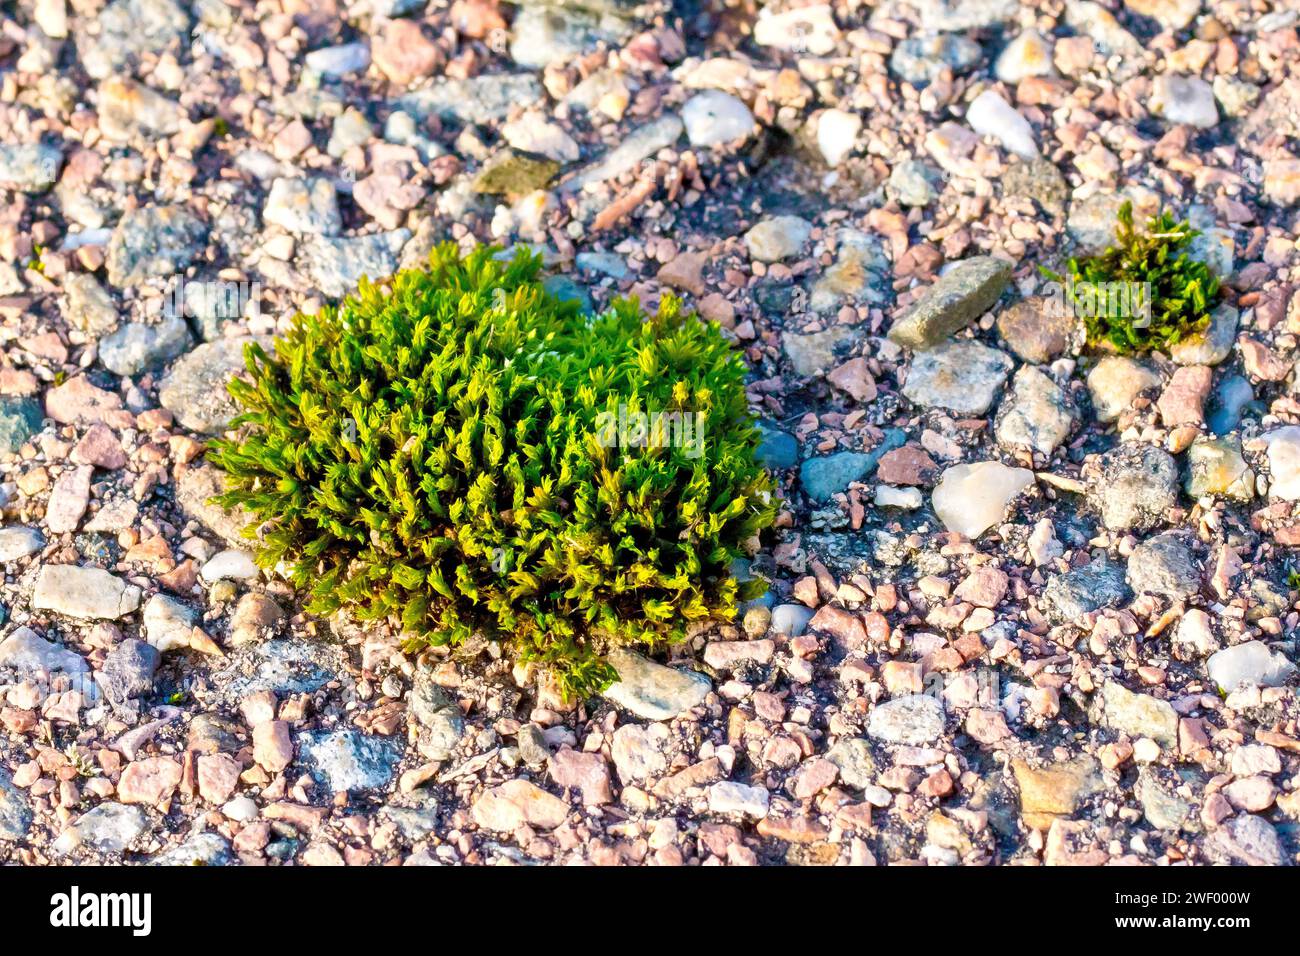 Close up showing a small tuft of moss growing on a rough gravel pathway. Stock Photo